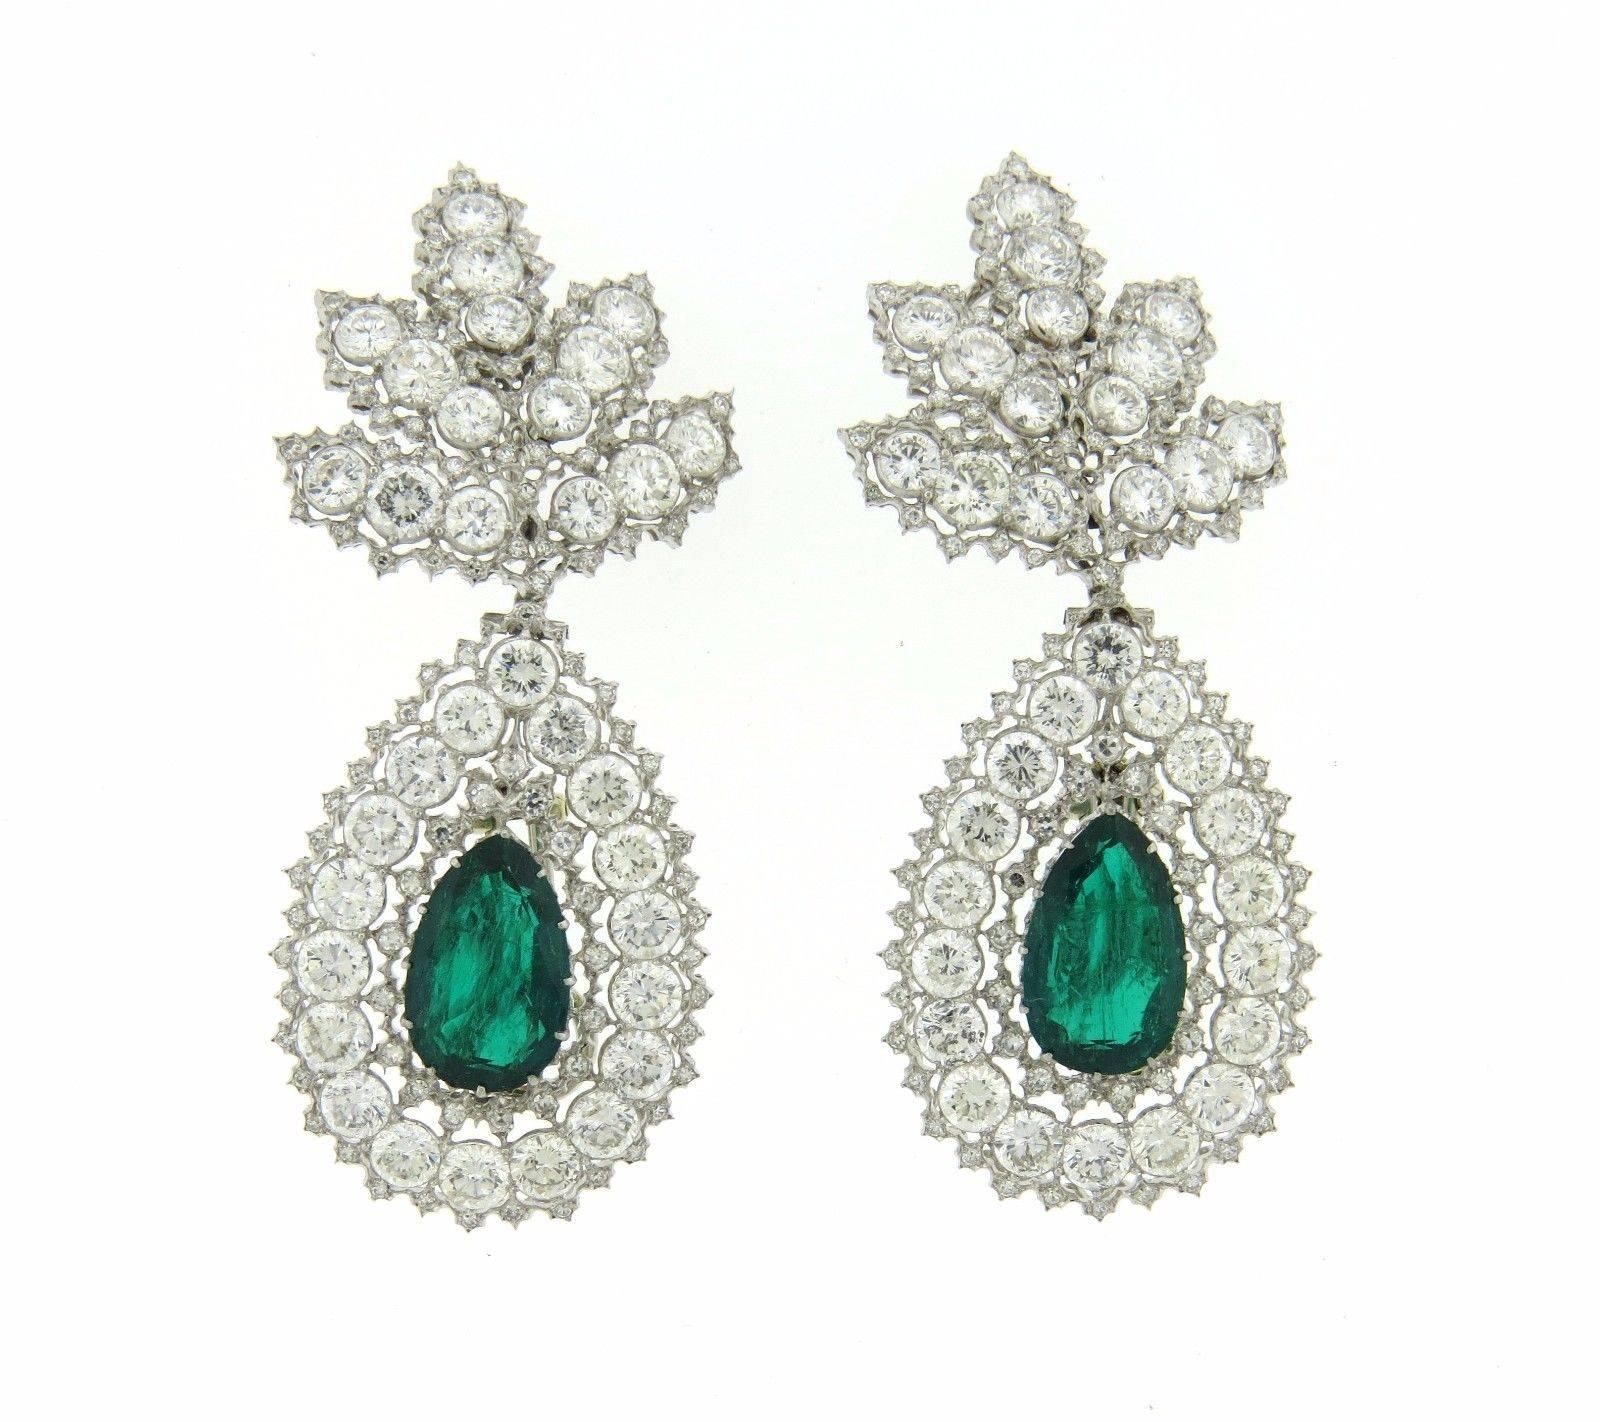 A pair of 18k gold earrings set with approximately 16 carats of diamonds and pear shaped emeralds.  The Earrings measure 70mm x 29mm, top portion measures 30mm x 32mm and teardrop bottom portion measures 40mm x 28mm.  Marked:	Buccellati, Italy, 750.